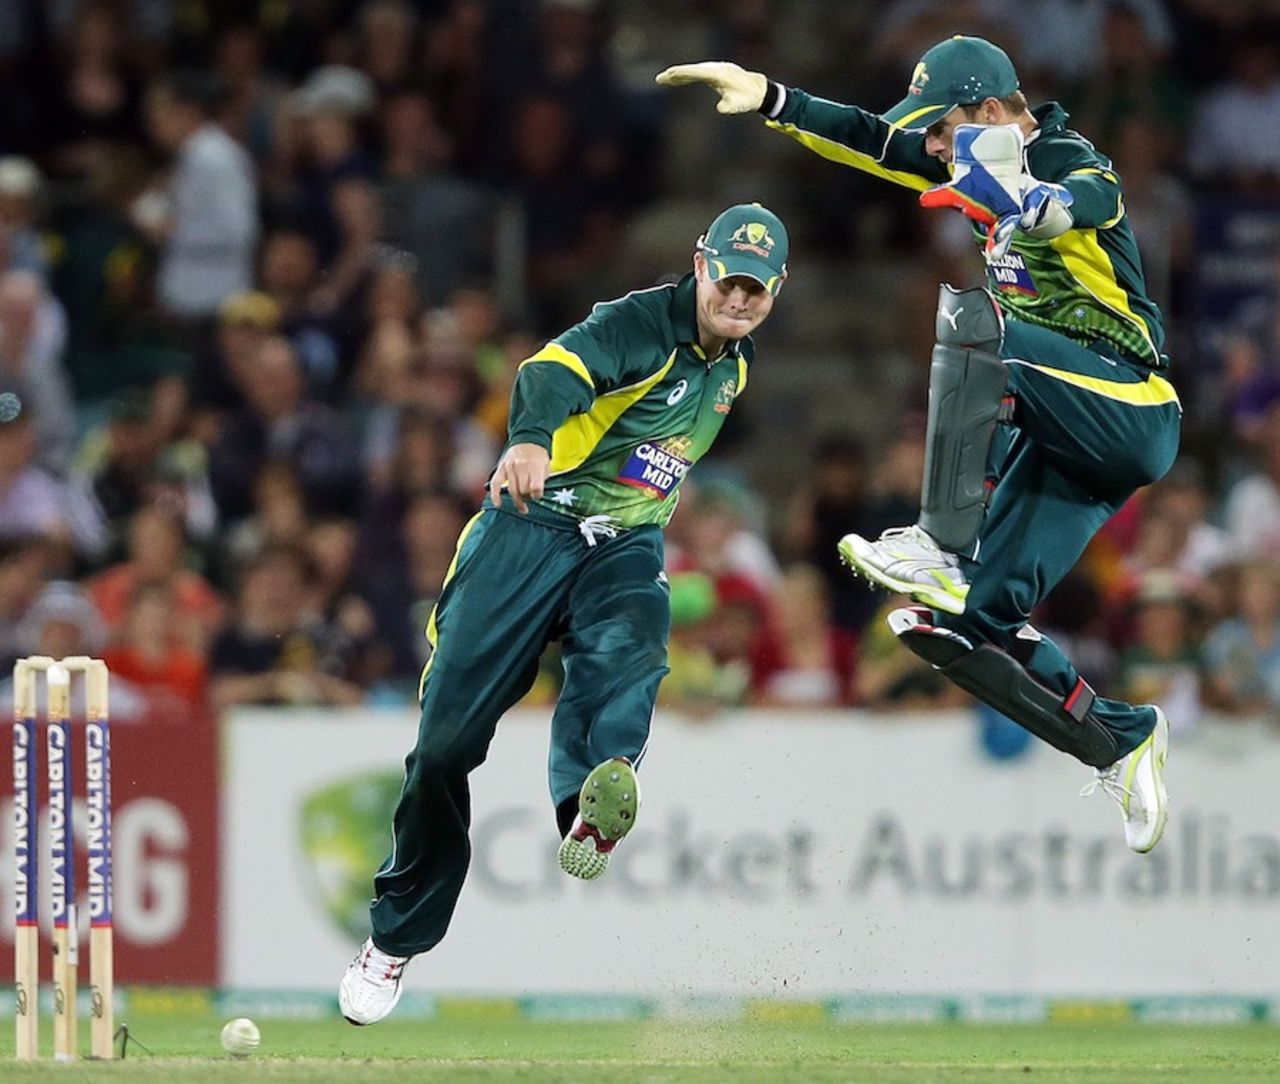 Steven Smith and Matthew Wade in a football moment, Australia v South Africa, 3rd ODI, Canberra, November 19, 2014